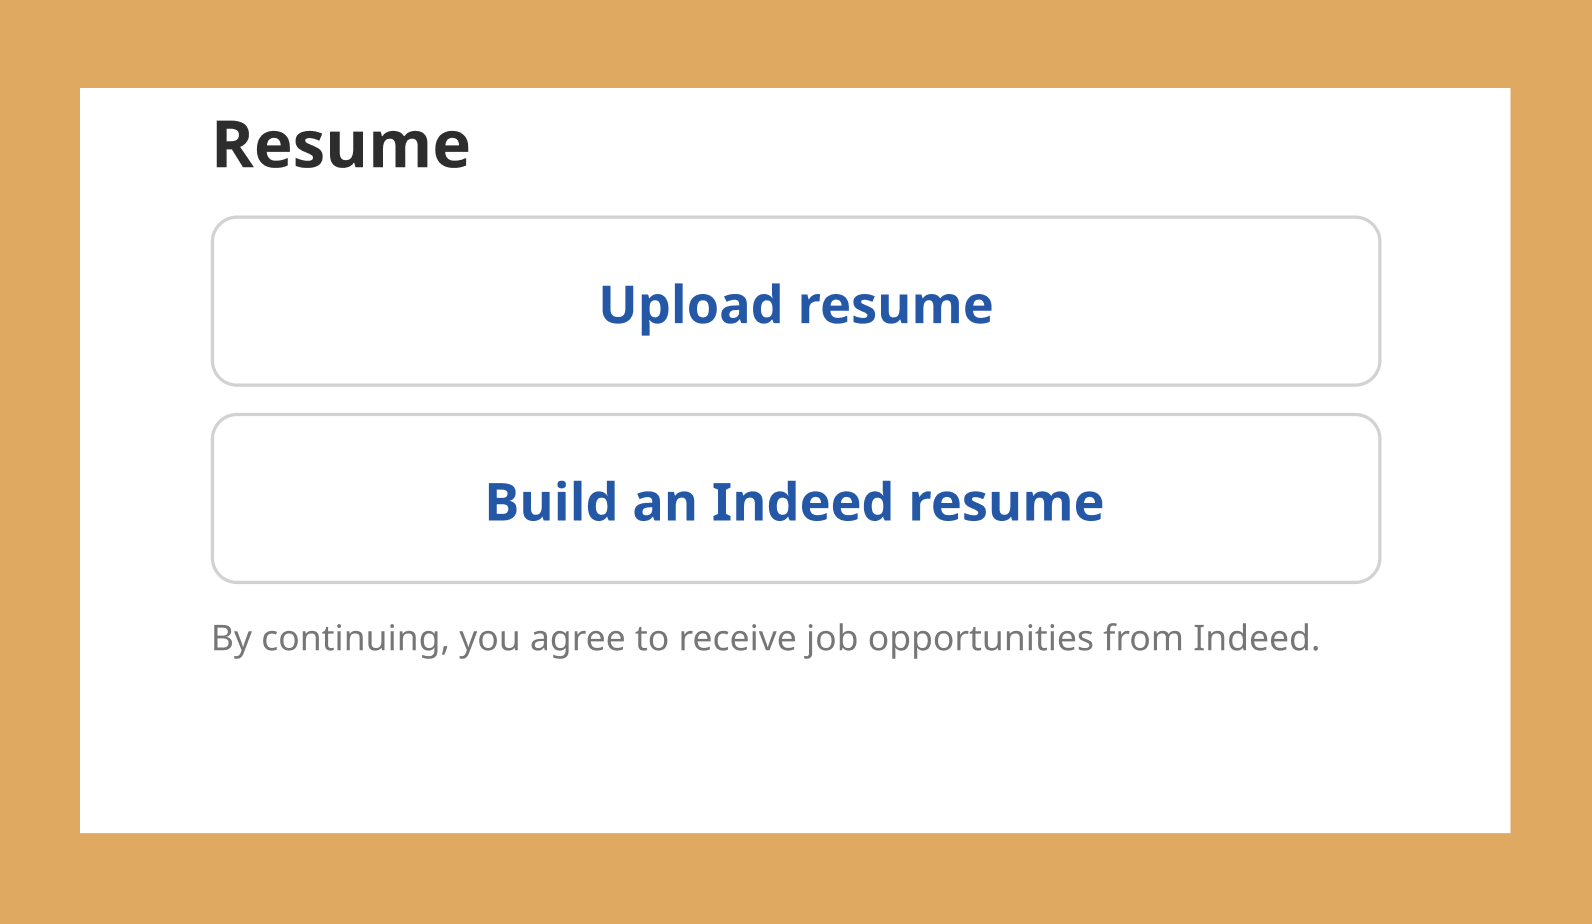 These are the buttons you use to upload a resume or build a new one using Indeed Resume.